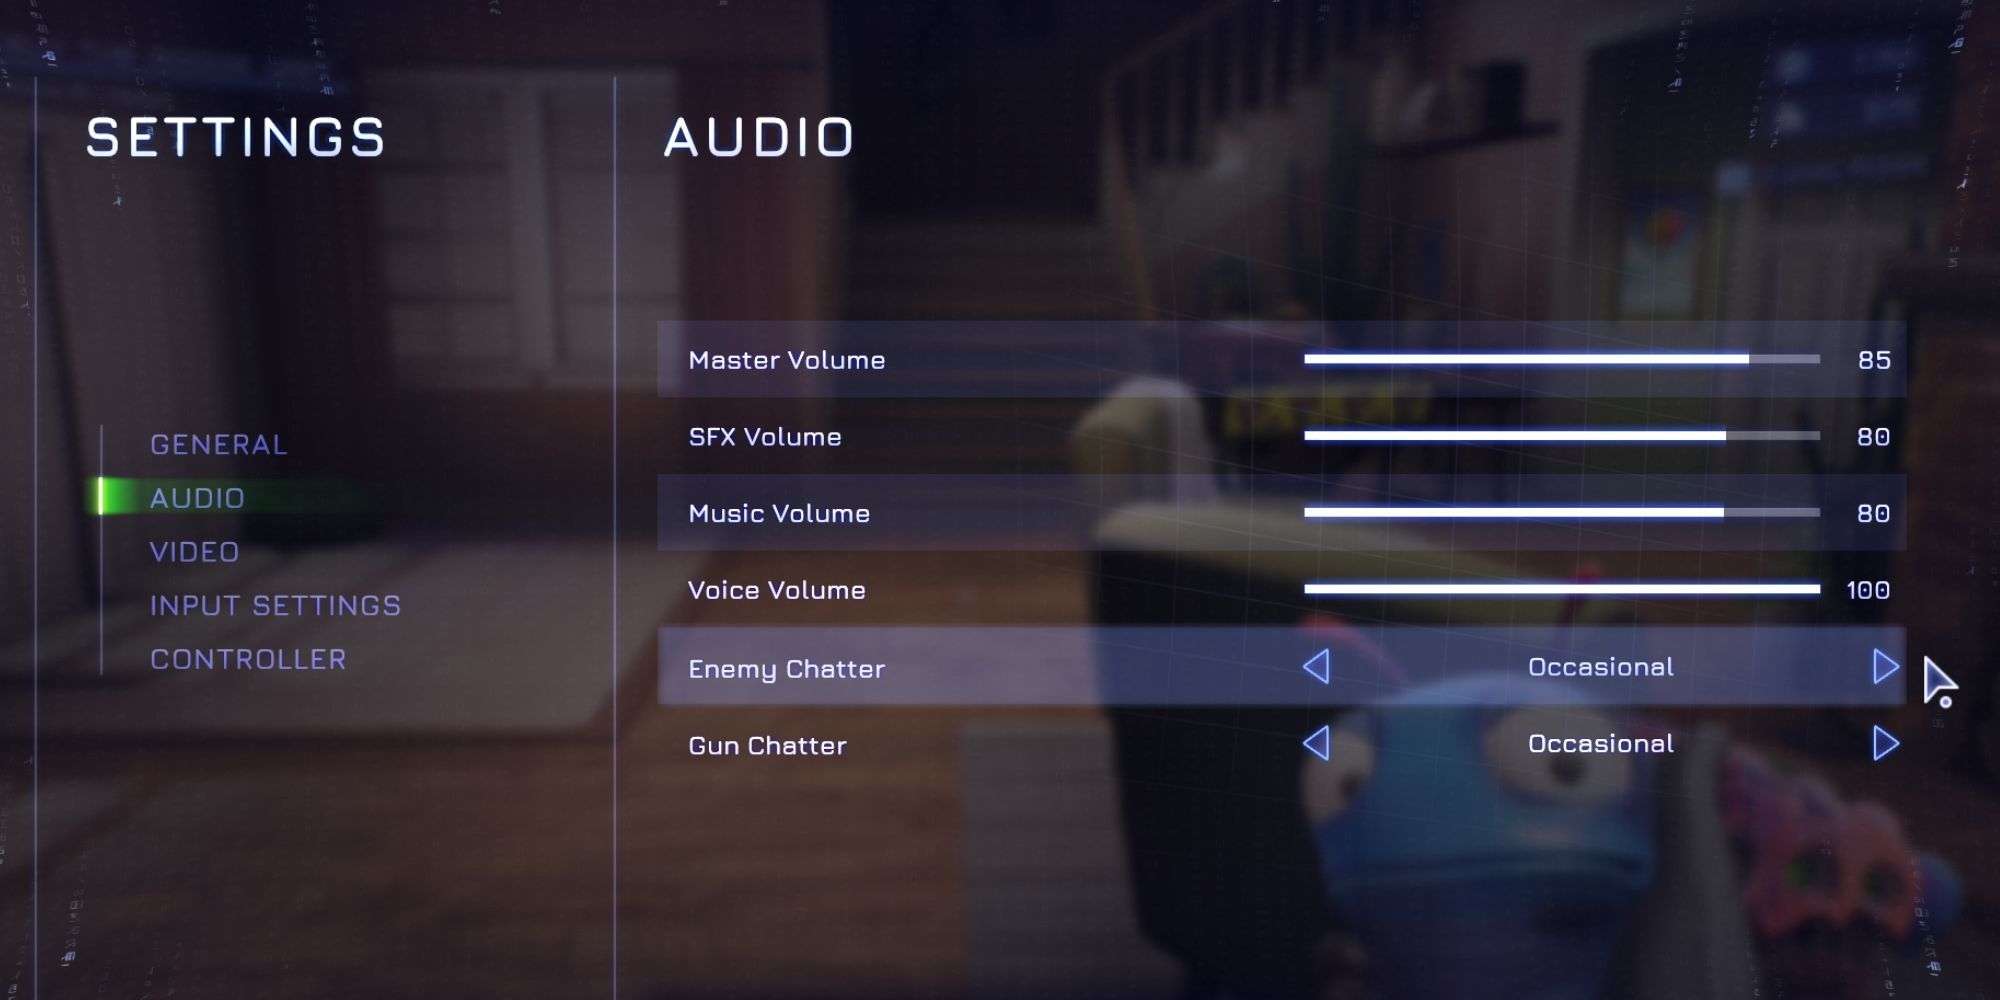 Adjusting the character chatter in the audio section of settings.